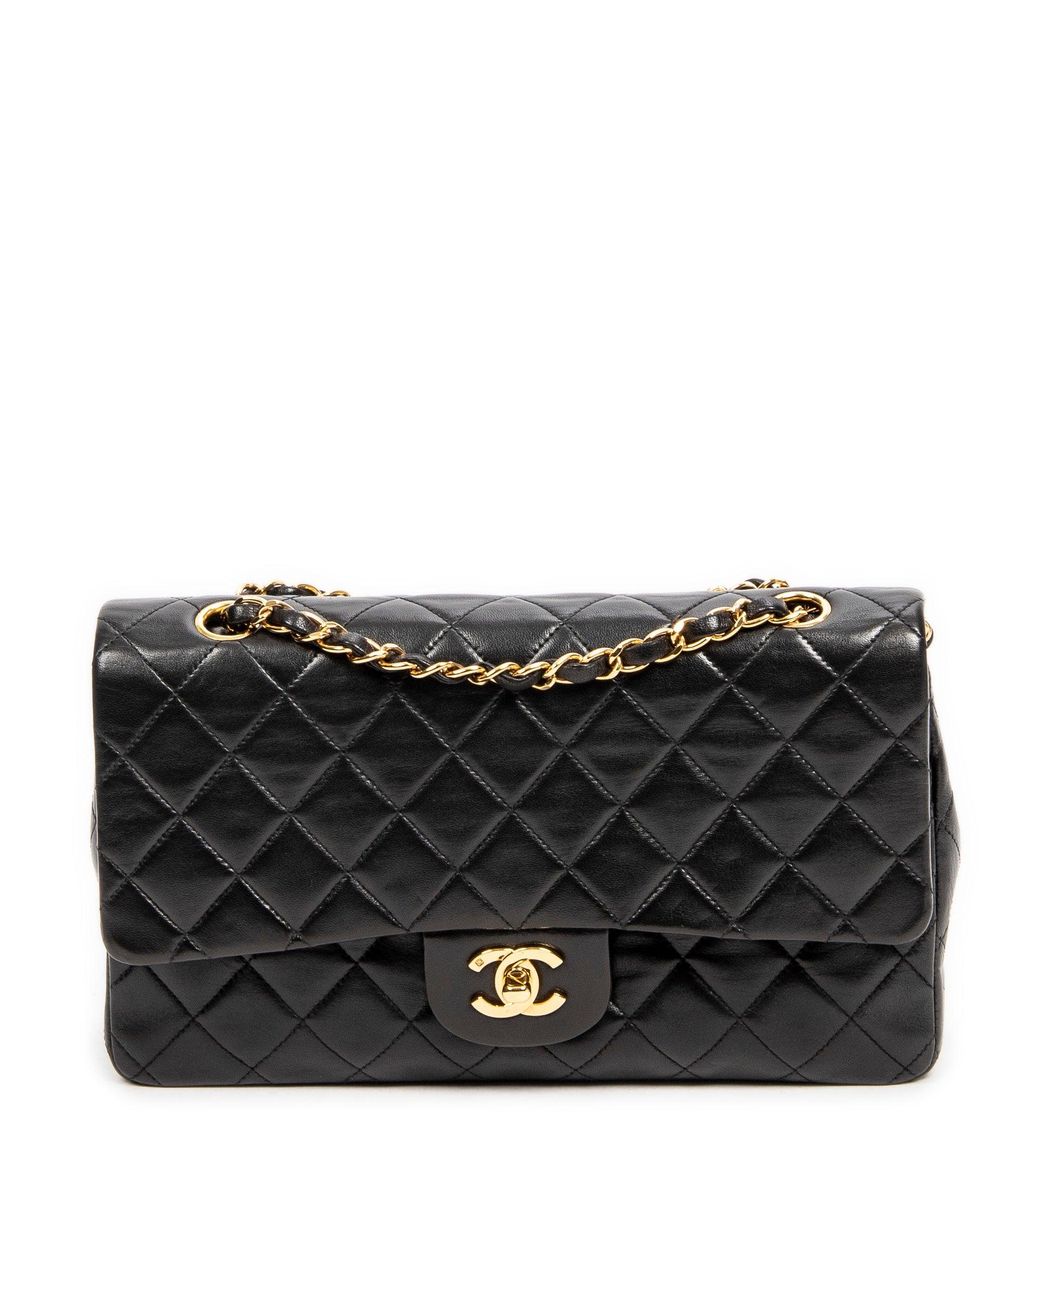 CHANEL, IVORY TWEED AND LEATHER WITH SILVER-TONE METAL CLASSIC FLAP BAG, Chanel: Handbags and Accessories, 2020